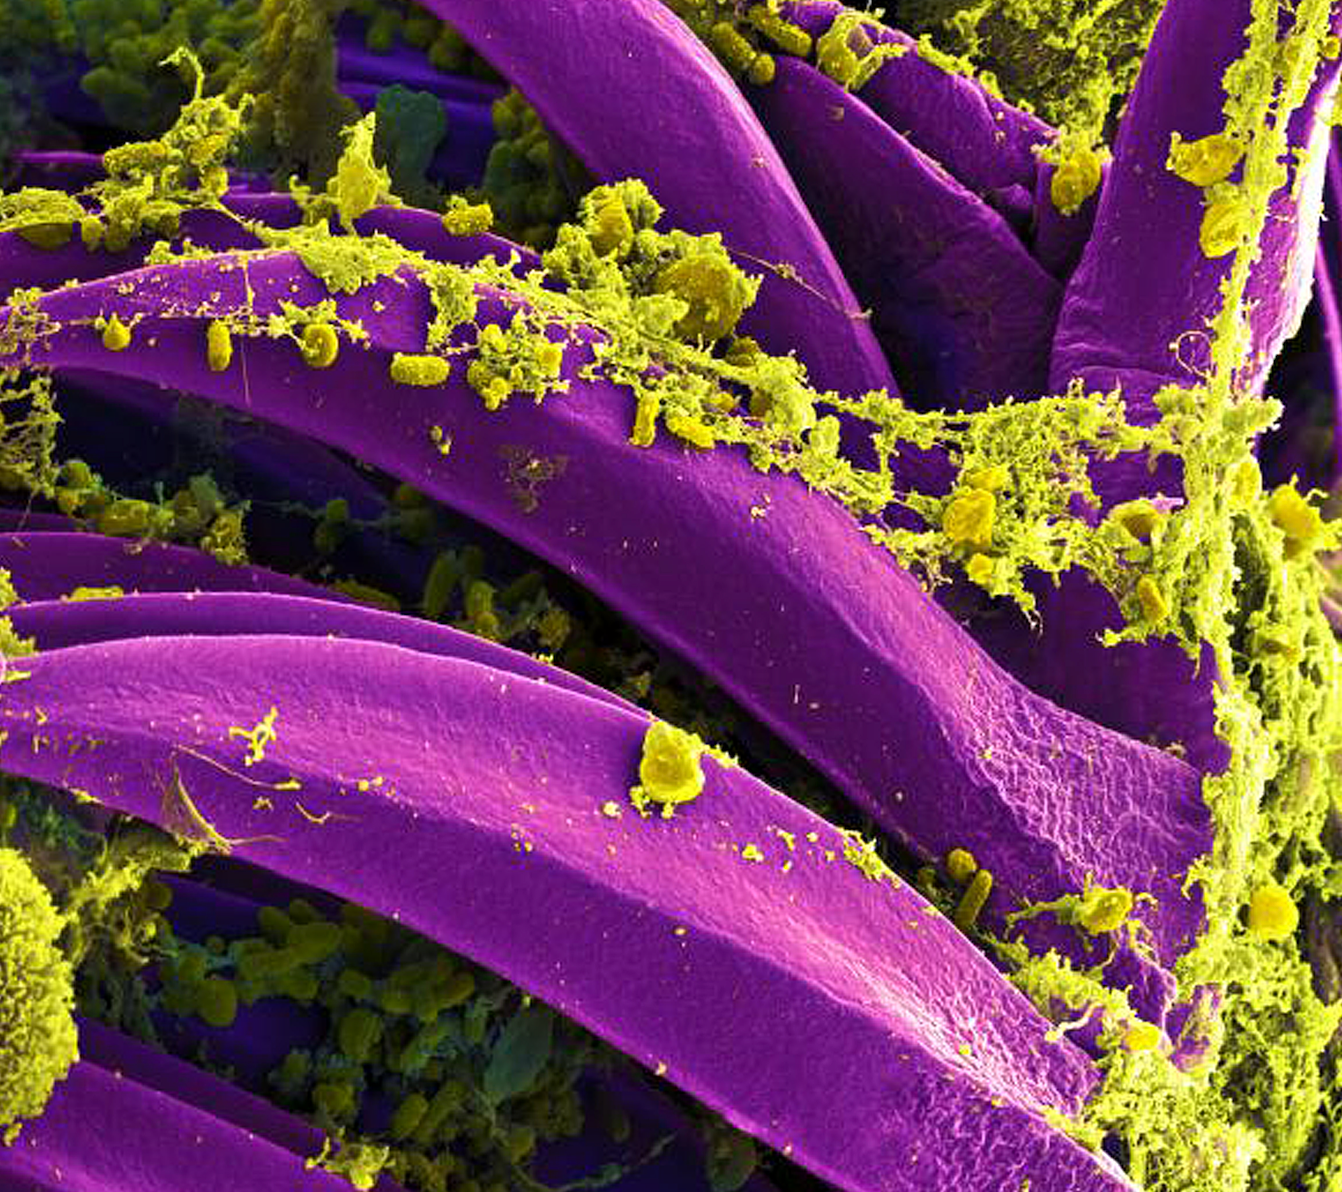 This digitally colorized scanning electron microscopic (SEM) image depicts a number of yellow-colored, Yersinia pestis bacteria, that had gathered on the proventricular spines of a Xenopsylla cheopis flea. These spines line the interior of the proventriculus, a part of the flea’s digestive system. The Y pestis bacterium is the pathogen that causes bubonic plague.

Image Credit: National Institute of Allergy and Infectious Diseases